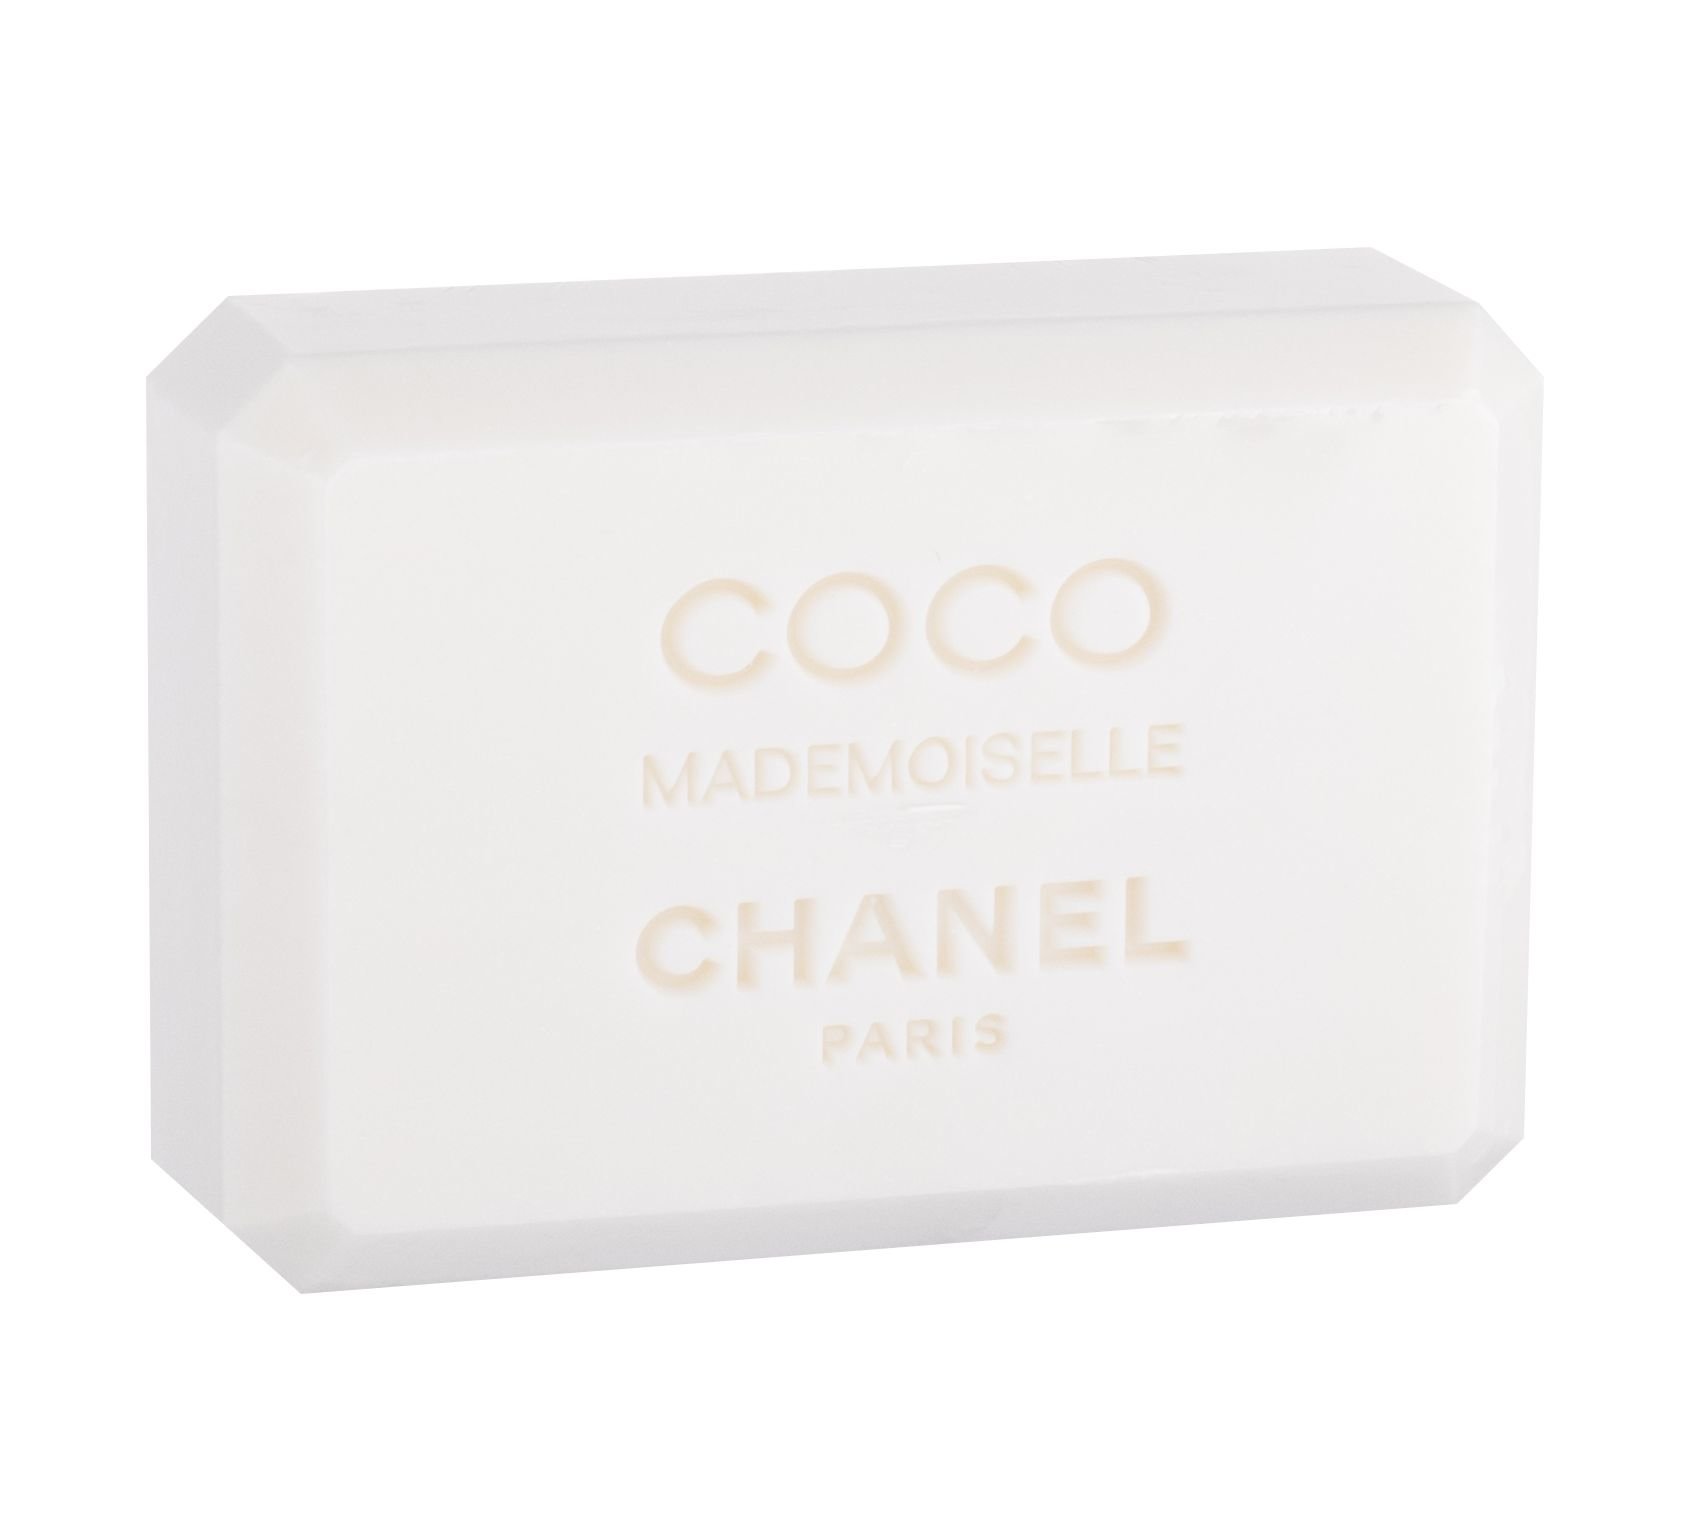 Chanel Coco Mademoiselle muilas